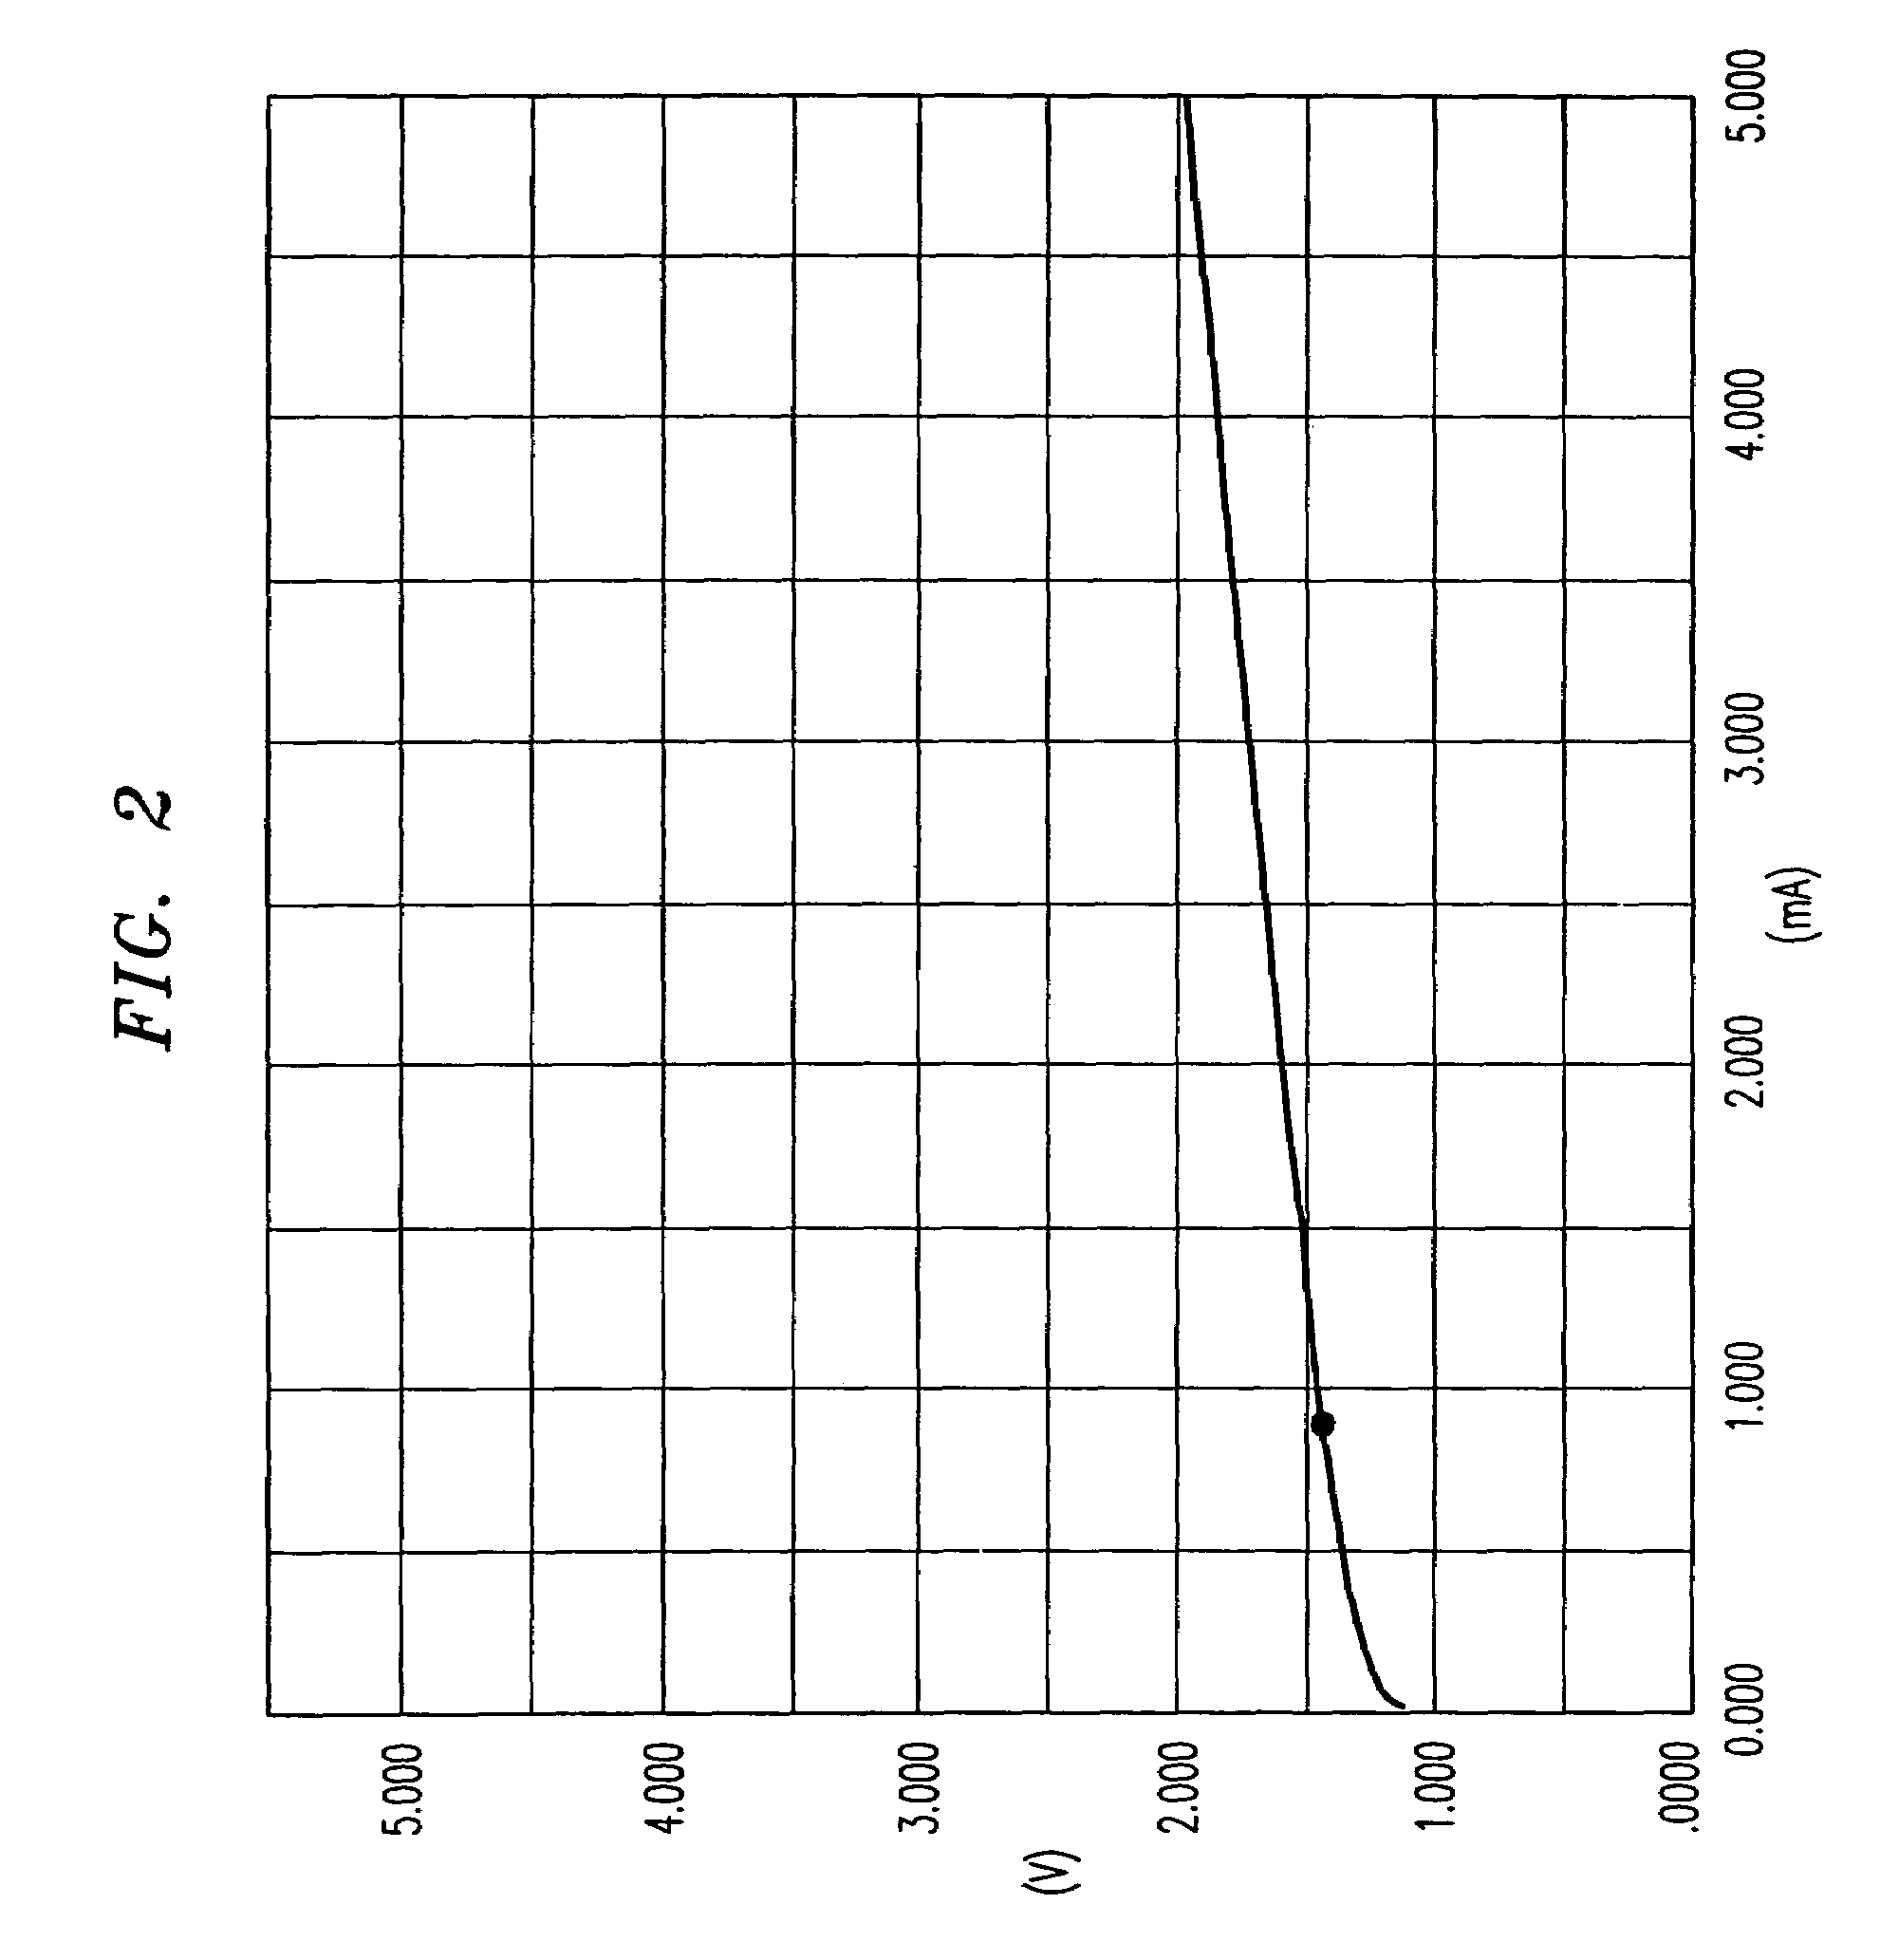 Power distribution network for optoelectronic circuits